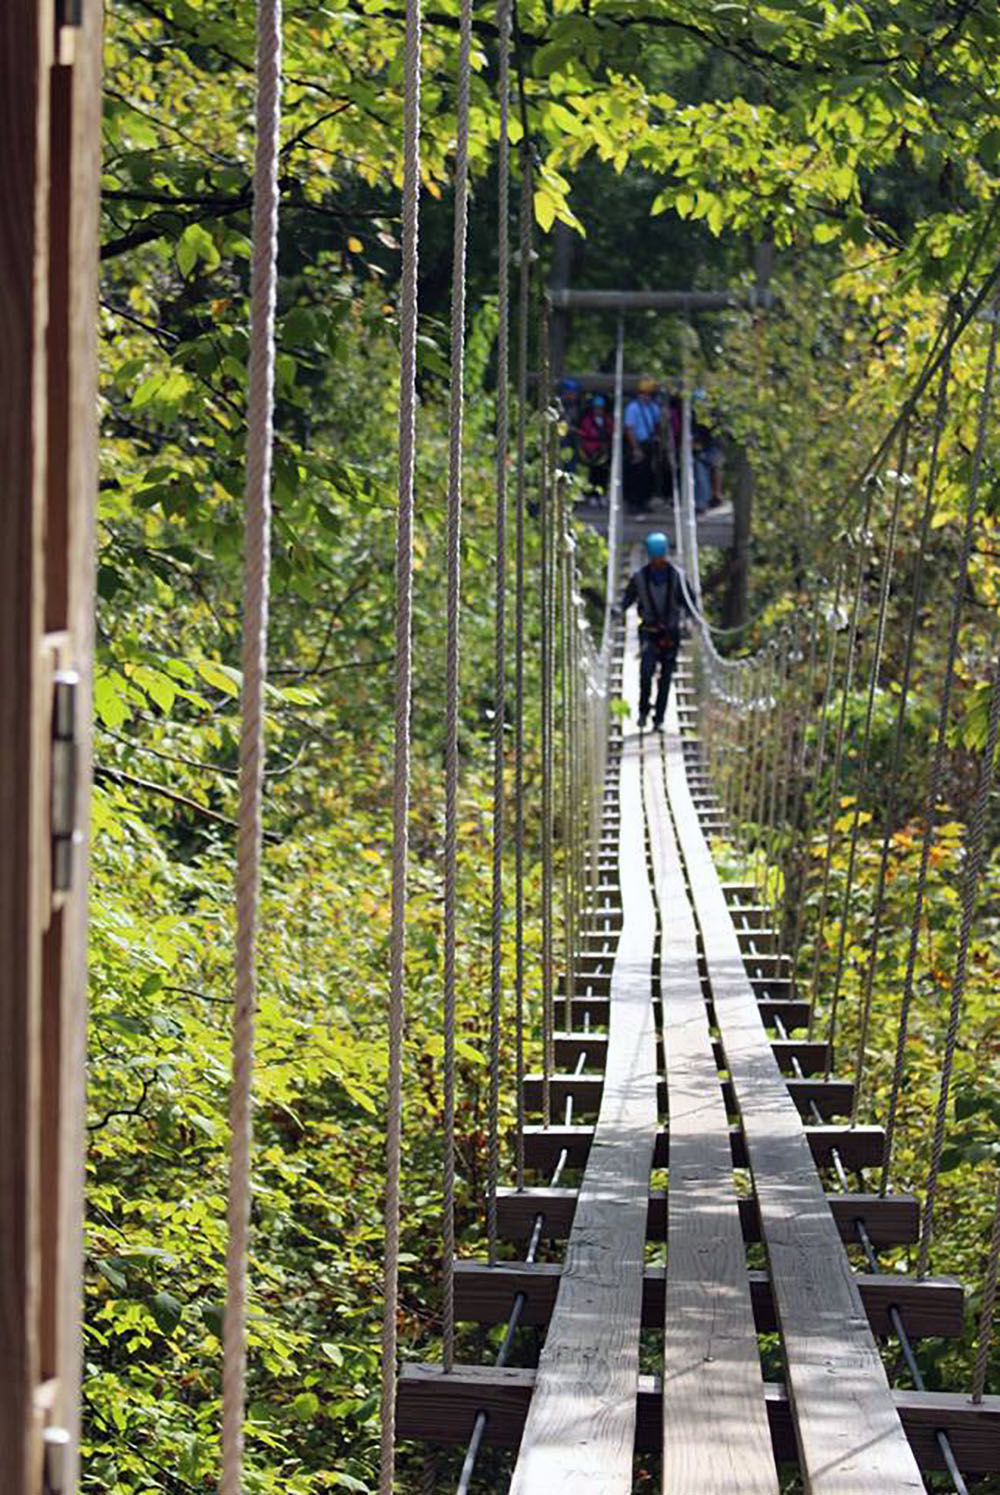 Submitted Photo - Suspension bridge at Kerfoot Canopy Tour near Henderson, Minnesota